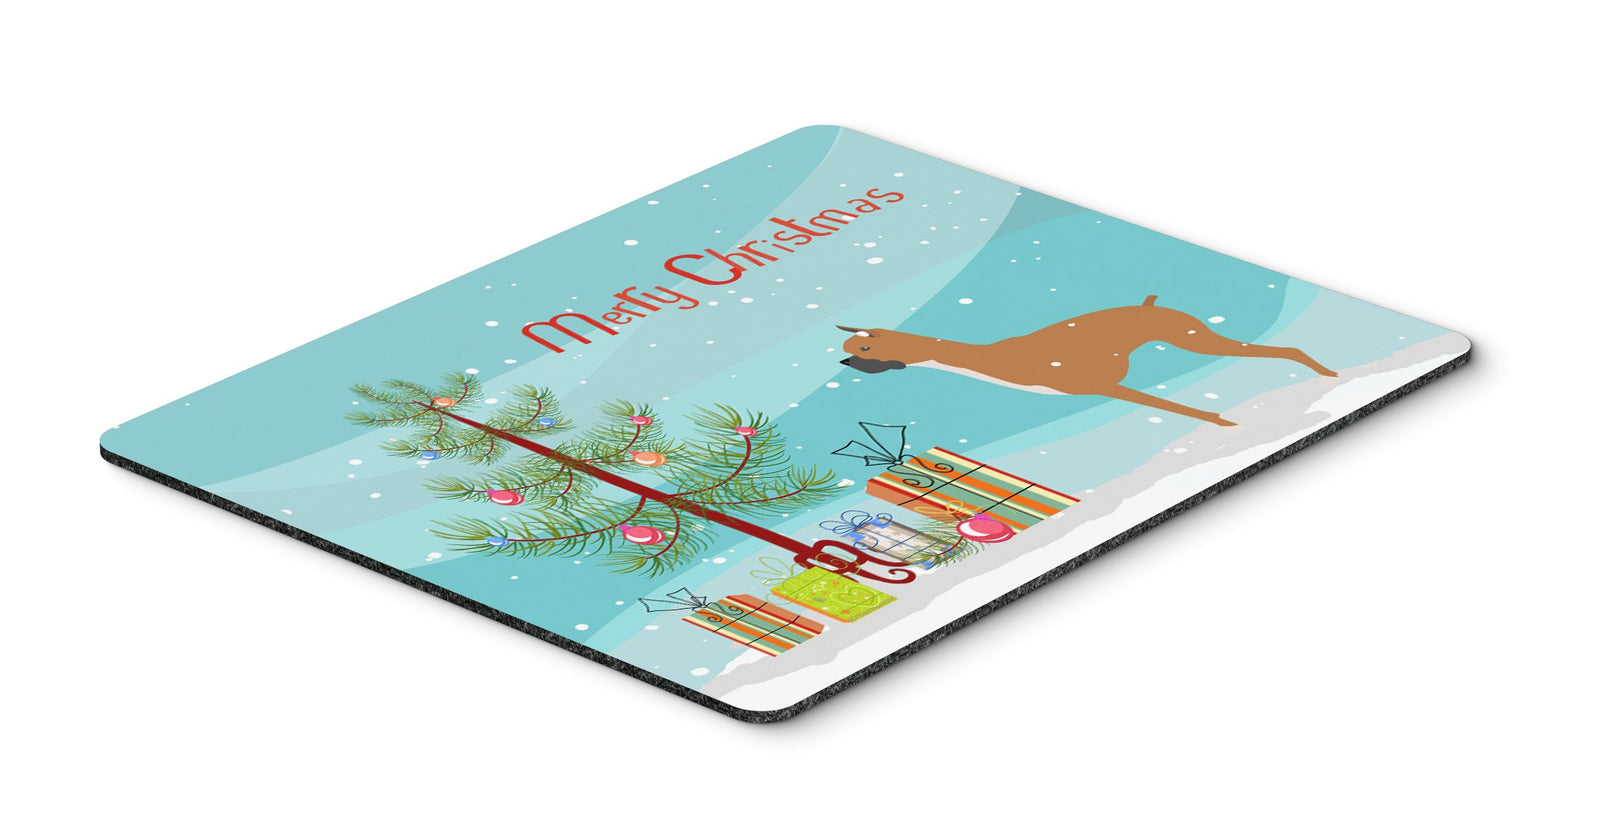 Boxer Merry Christmas Tree Mouse Pad, Hot Pad or Trivet by Caroline's Treasures